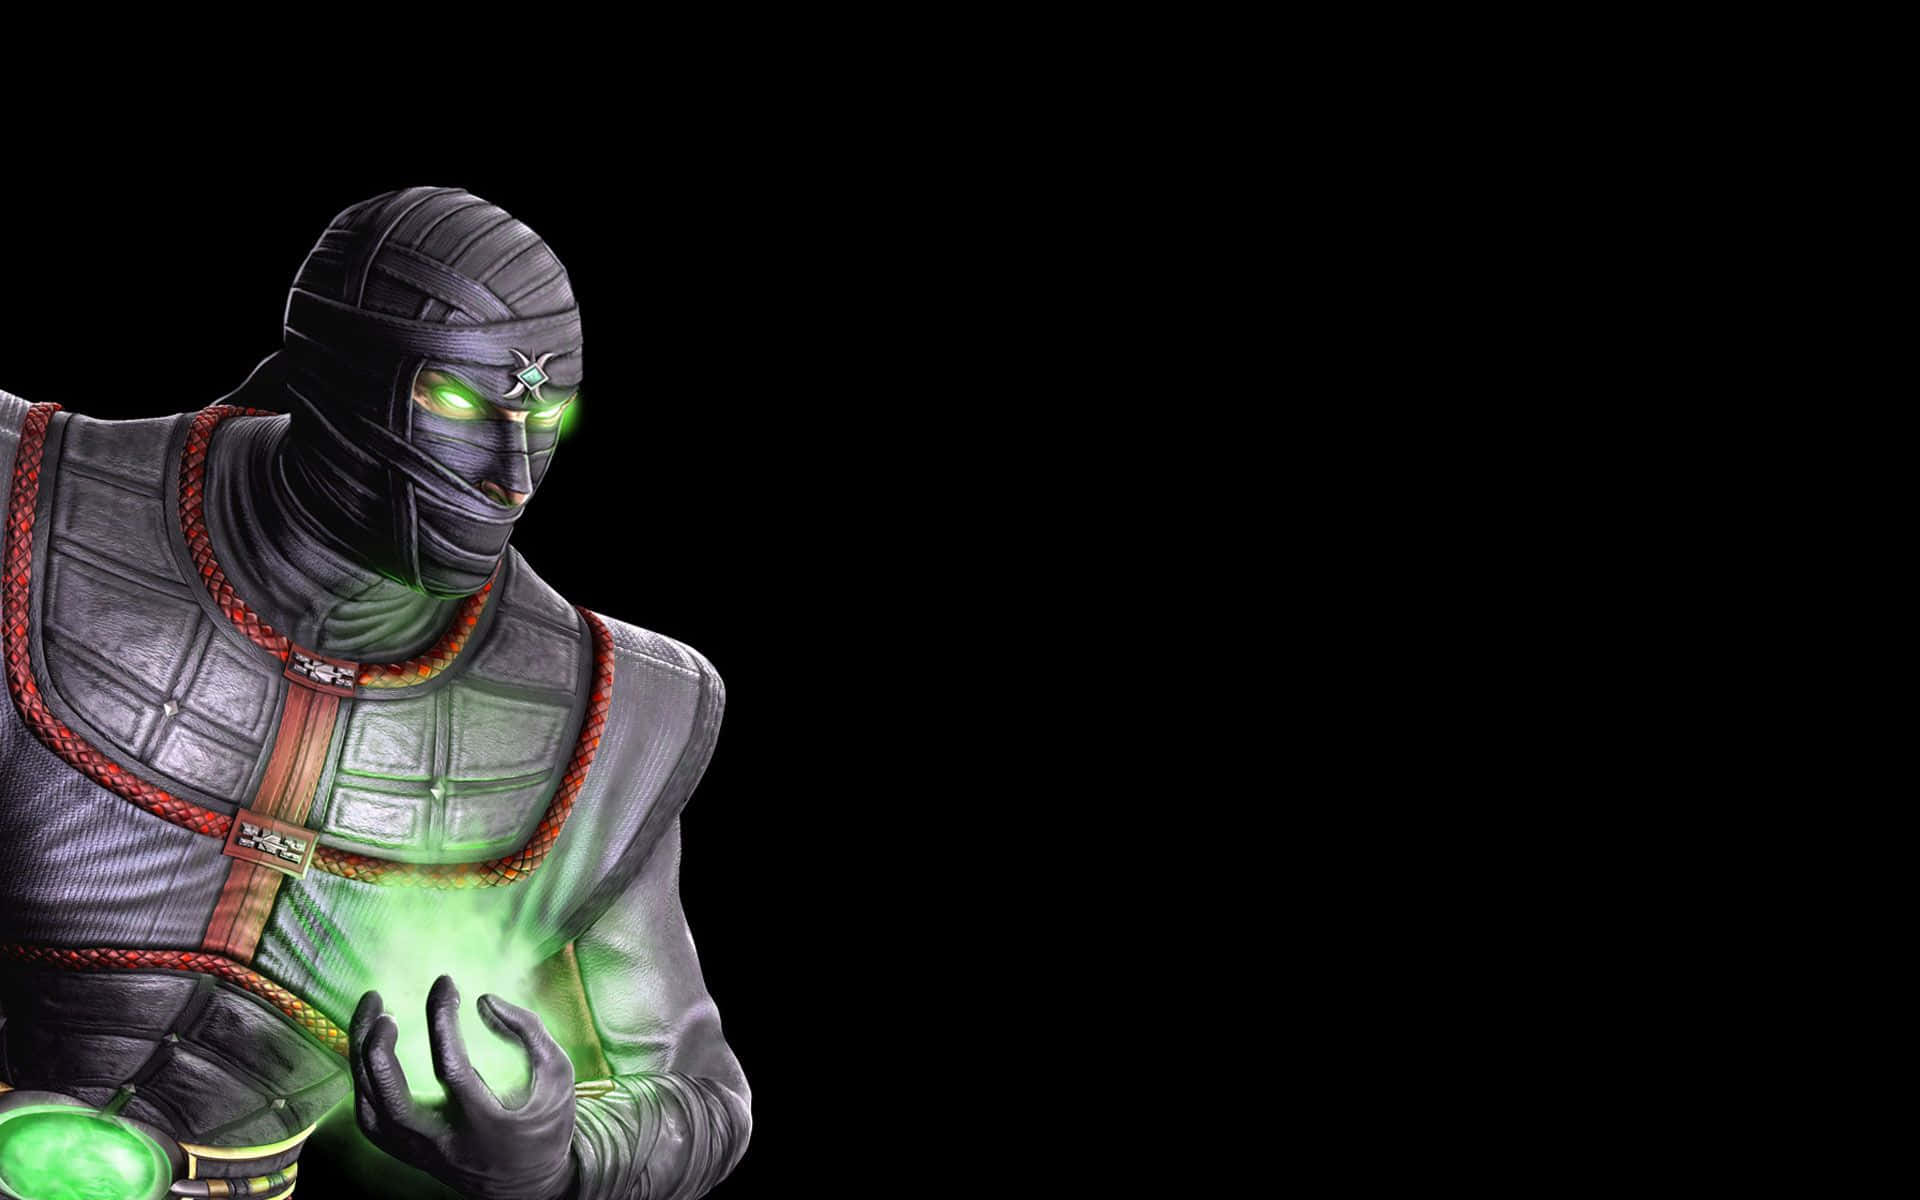 Caption: Reptile, the stealthy warrior from Mortal Kombat Wallpaper